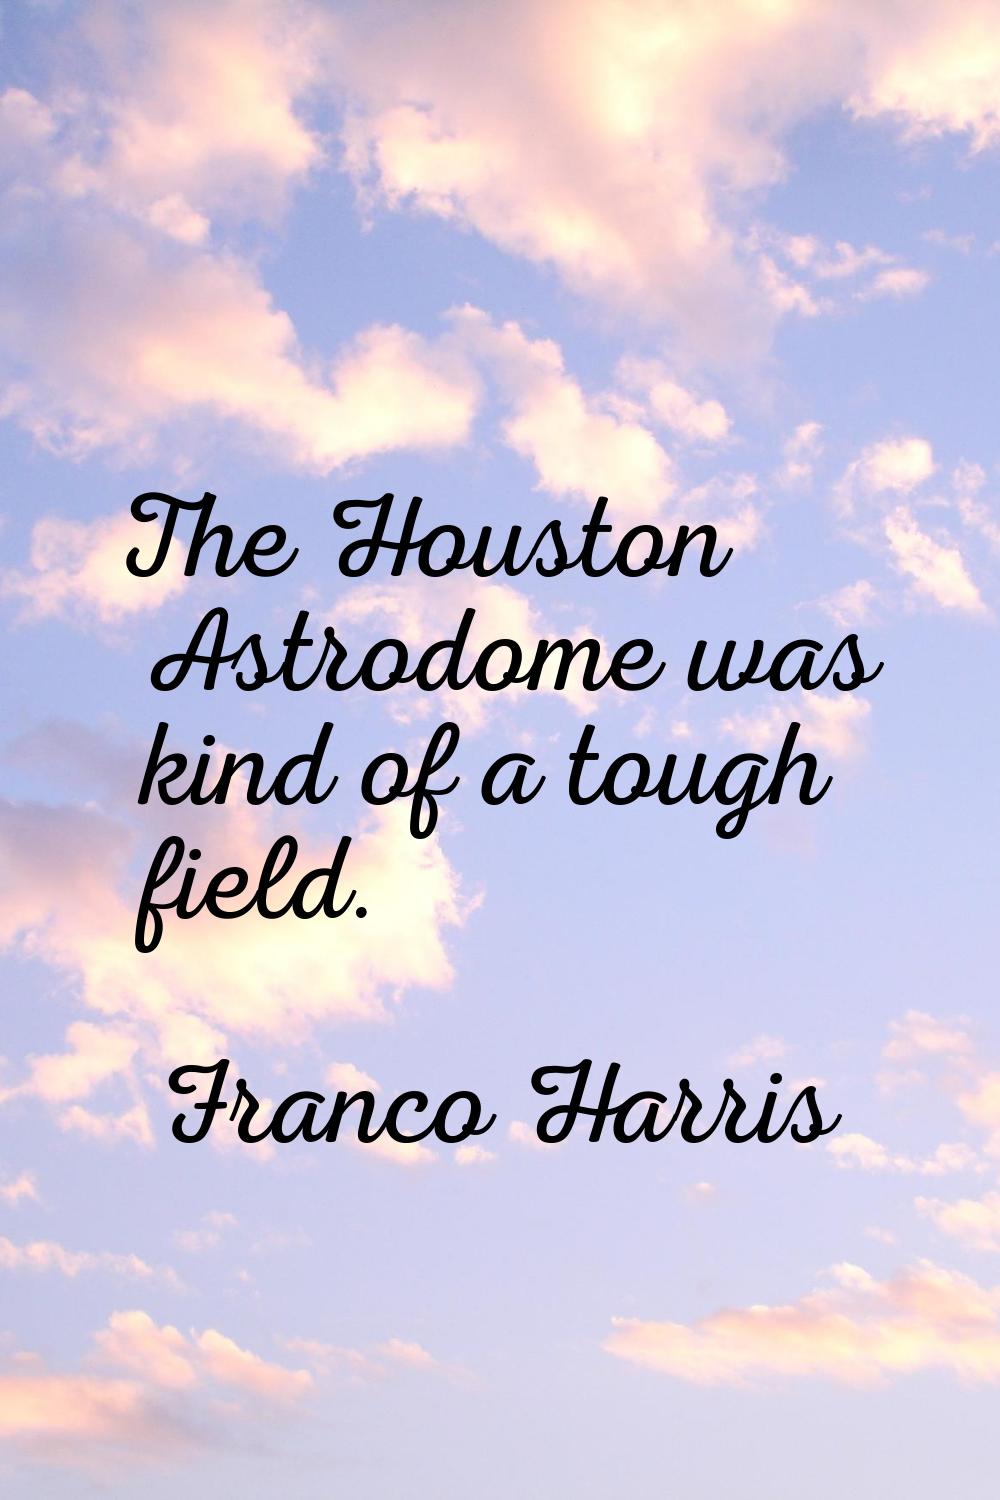 The Houston Astrodome was kind of a tough field.